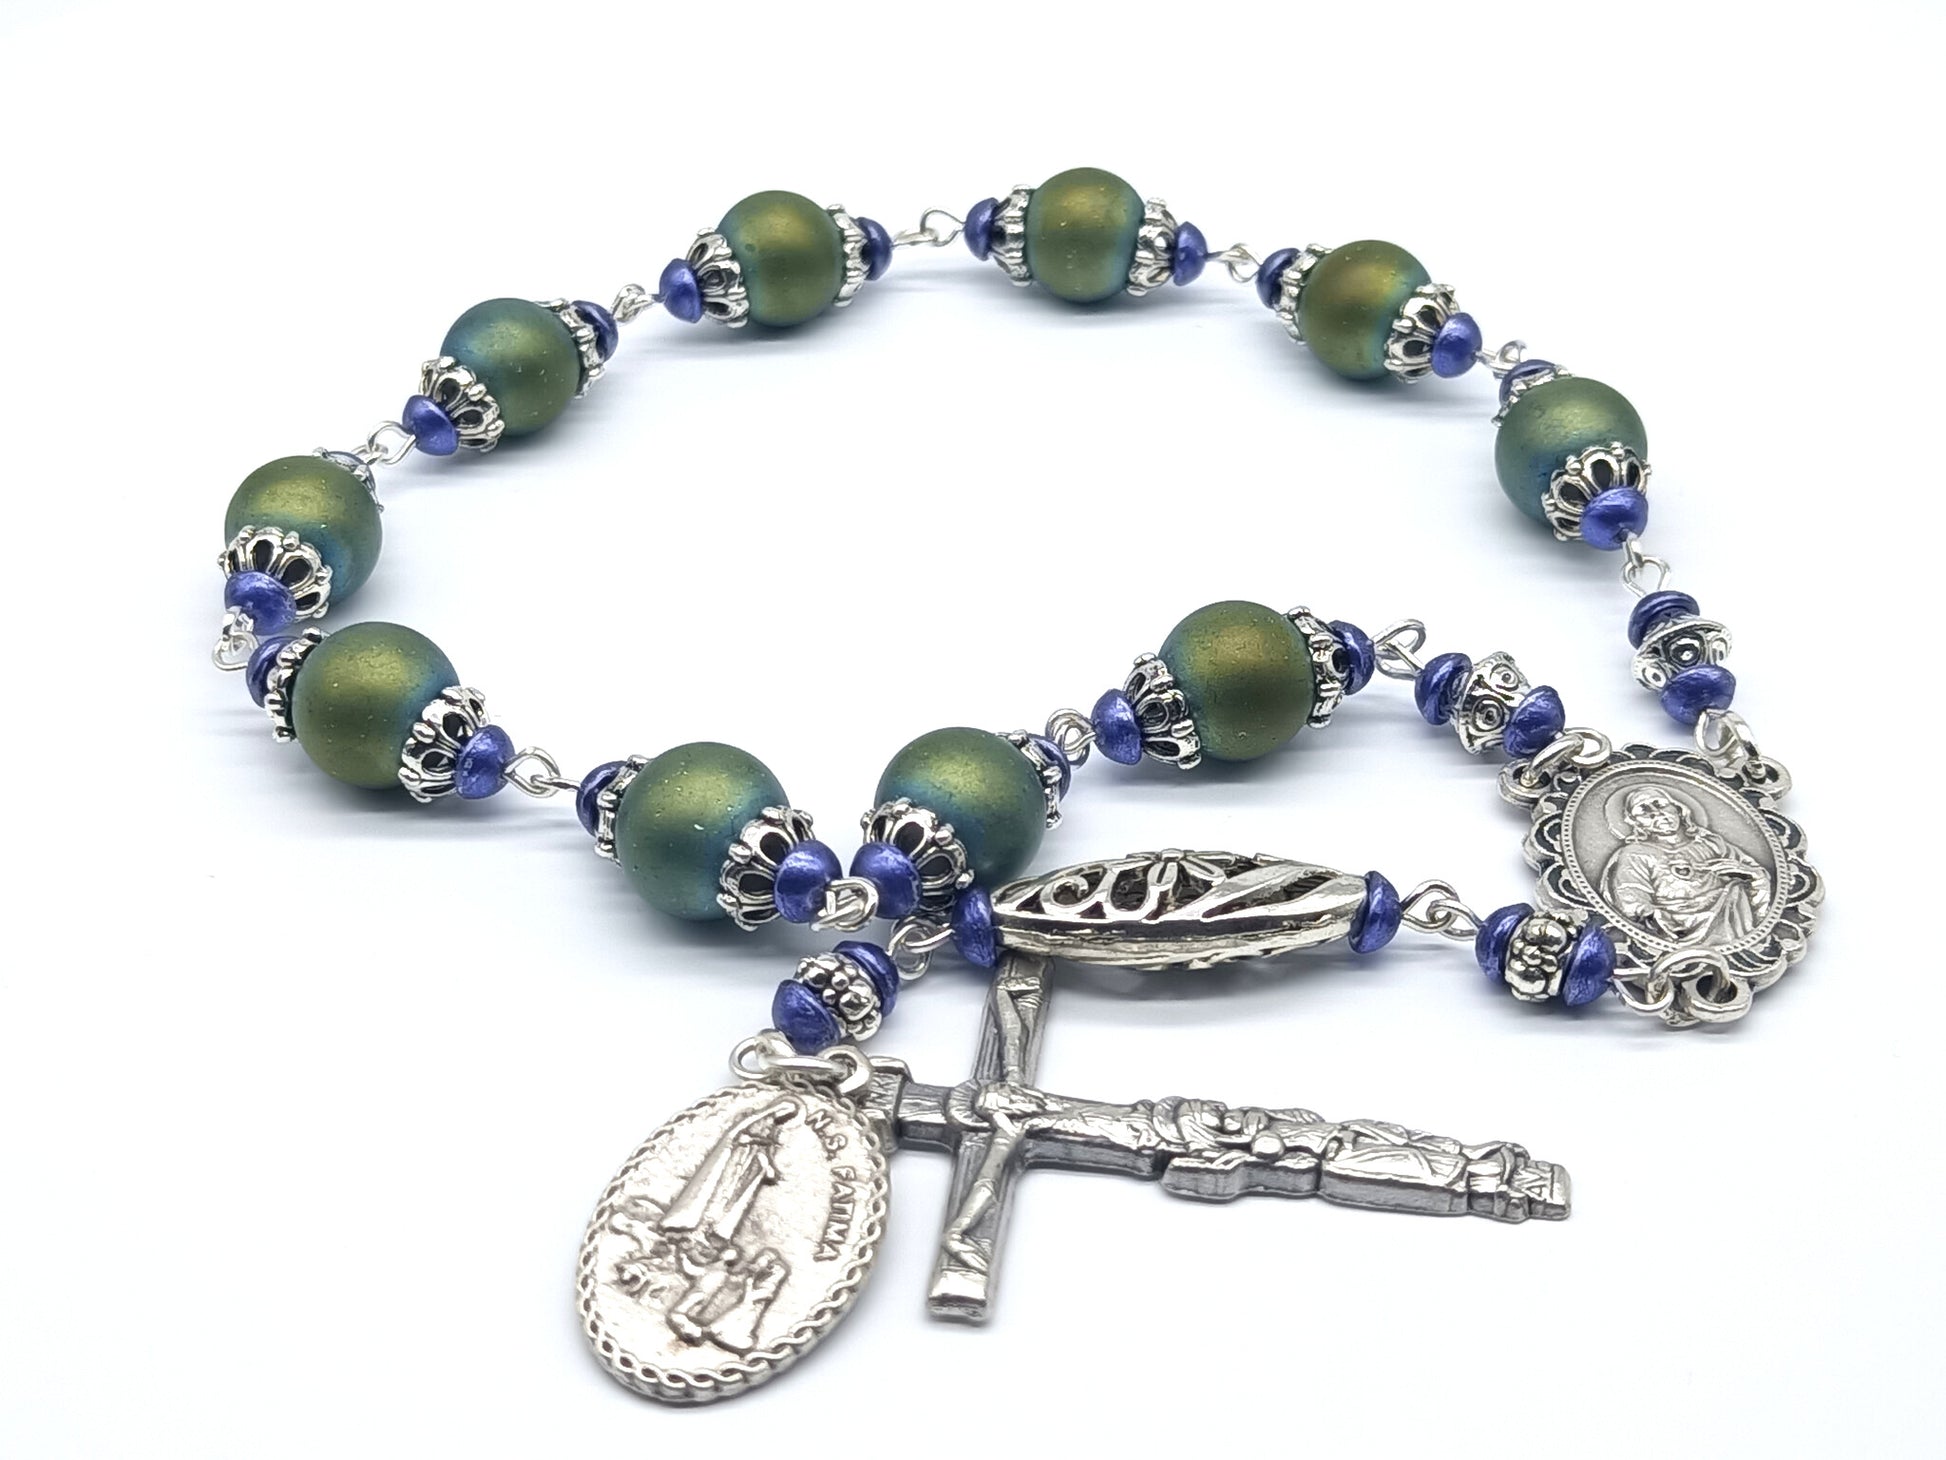 Our Lady of Fatima Unique single decade rosary beads with green glass beads, blue bead caps and silver crucifix and medals.